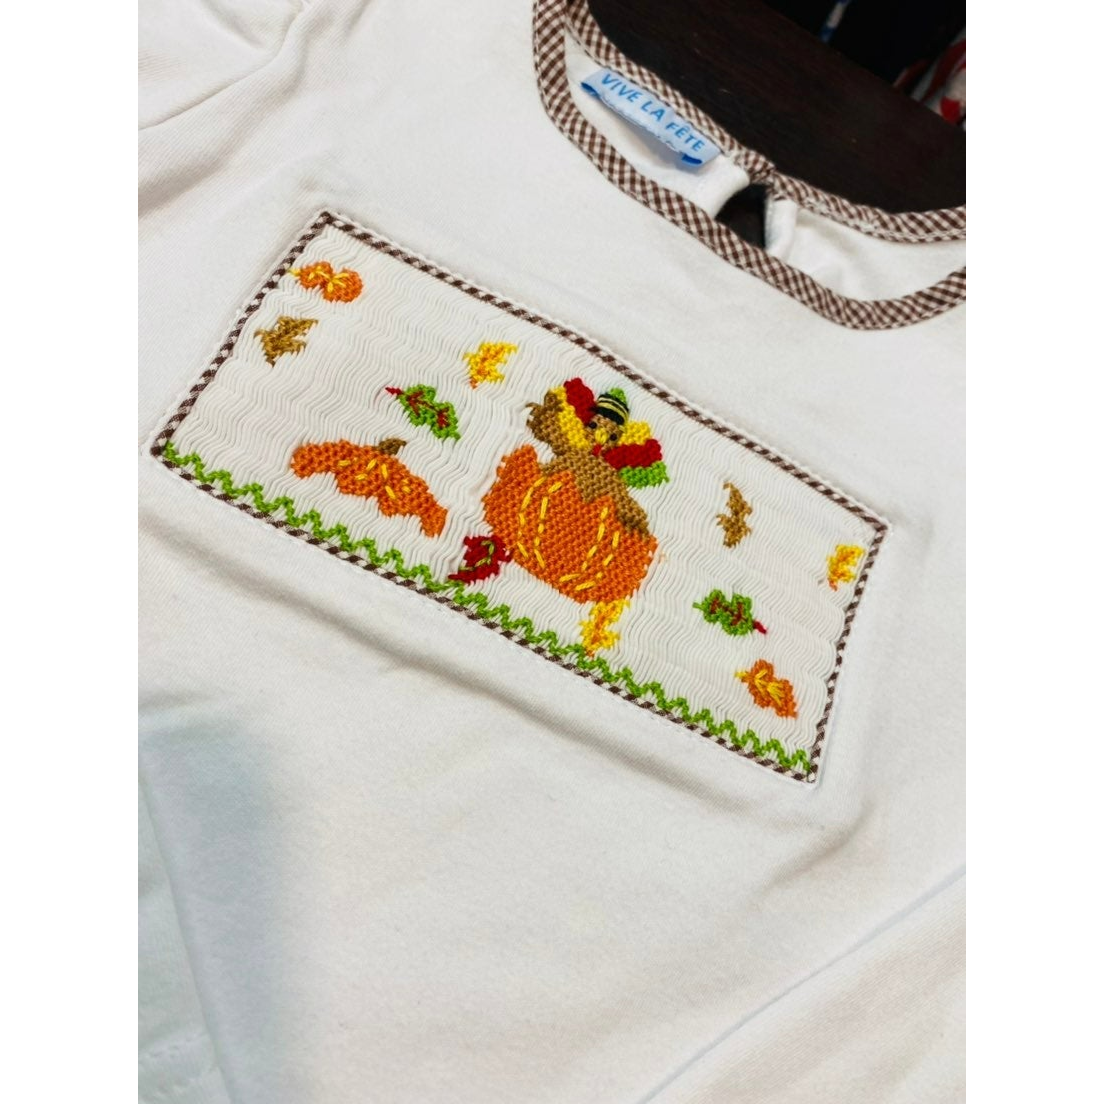 3/4 girls smocked turkey outfit for Thanksgiving